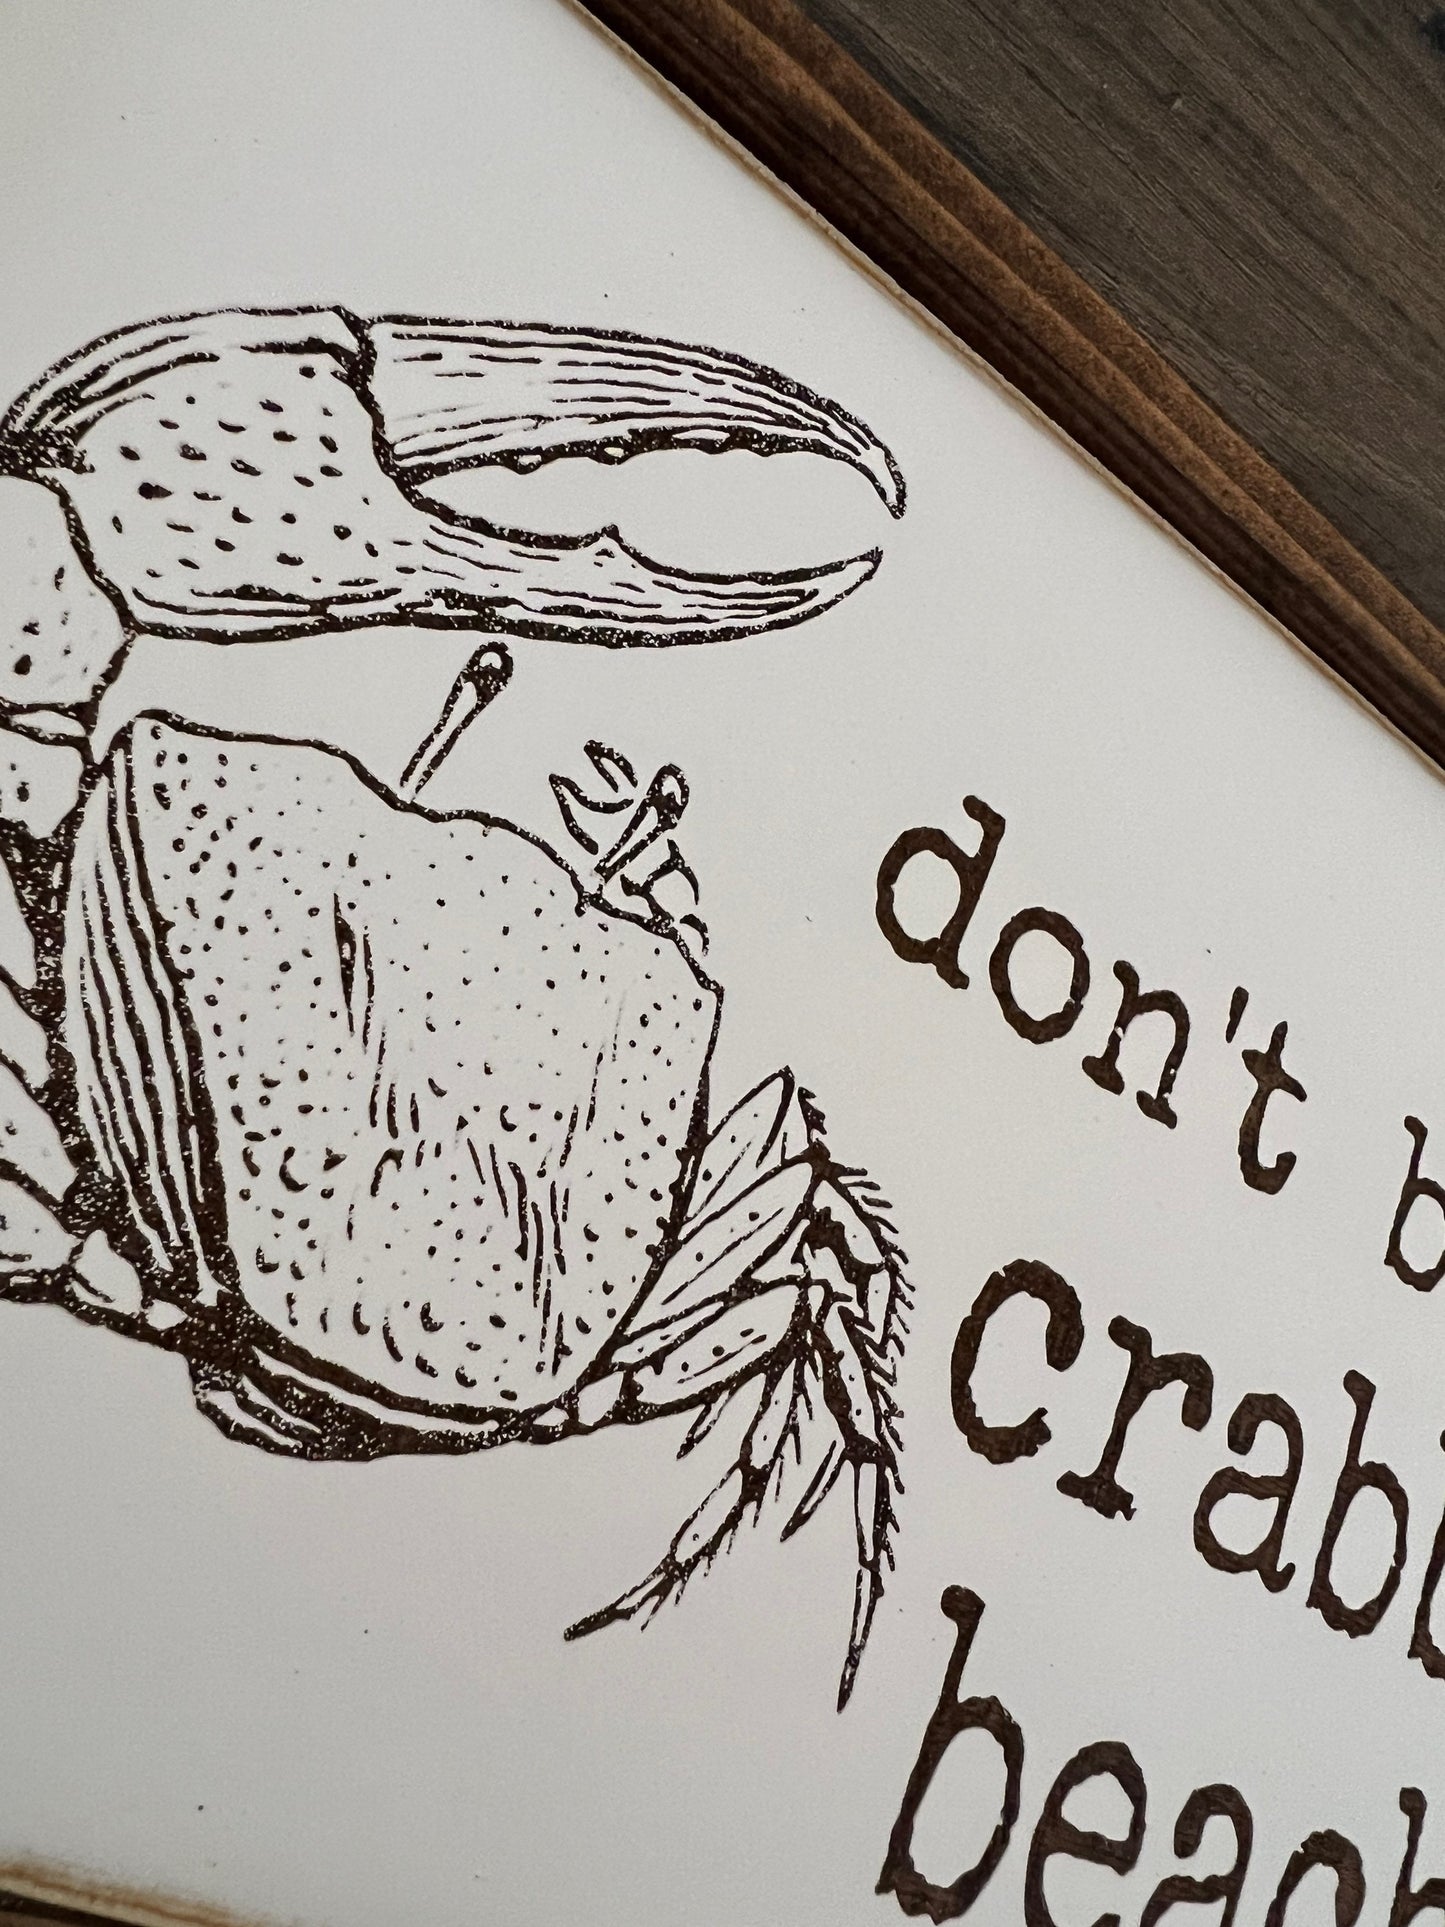 Don’t Be A Crabby Beach